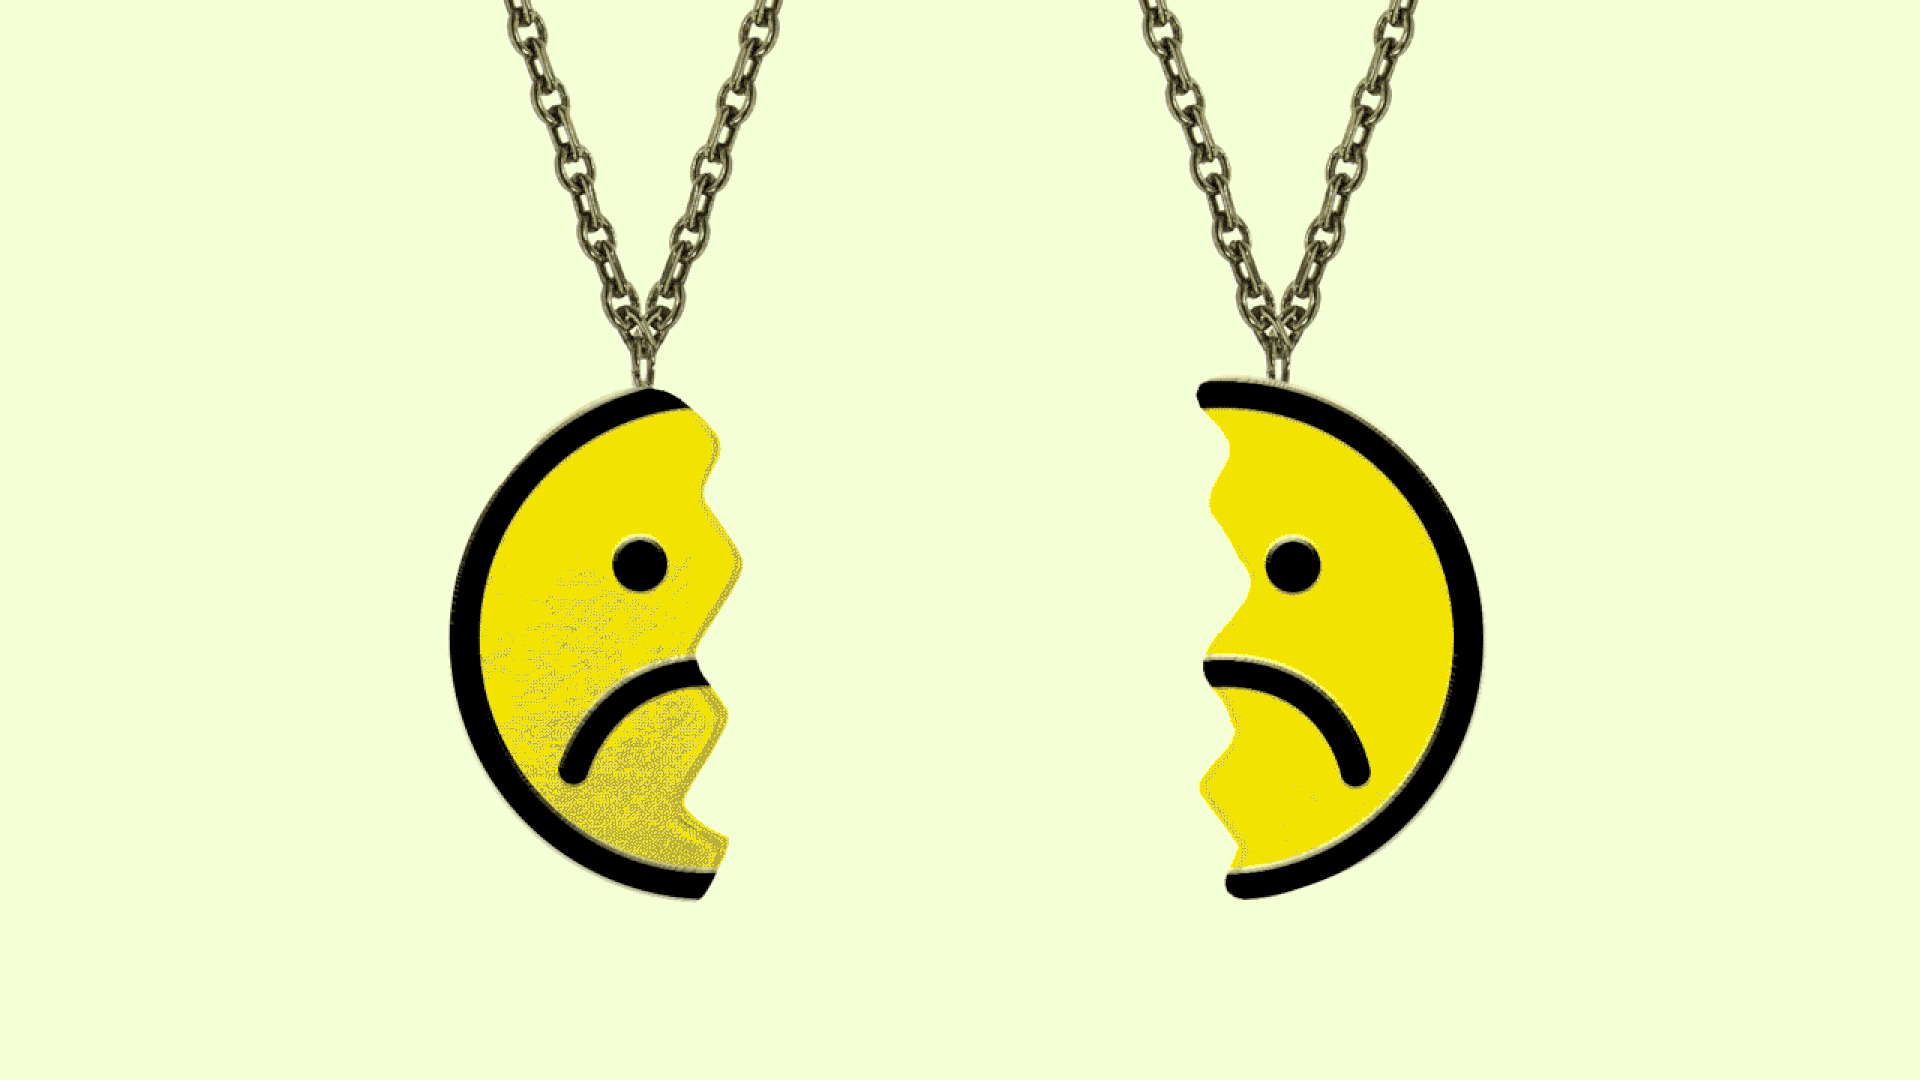 Animated illustration of two halves of a sad face pendant on necklace chains gravitating towards each other and turning into a united smiley face